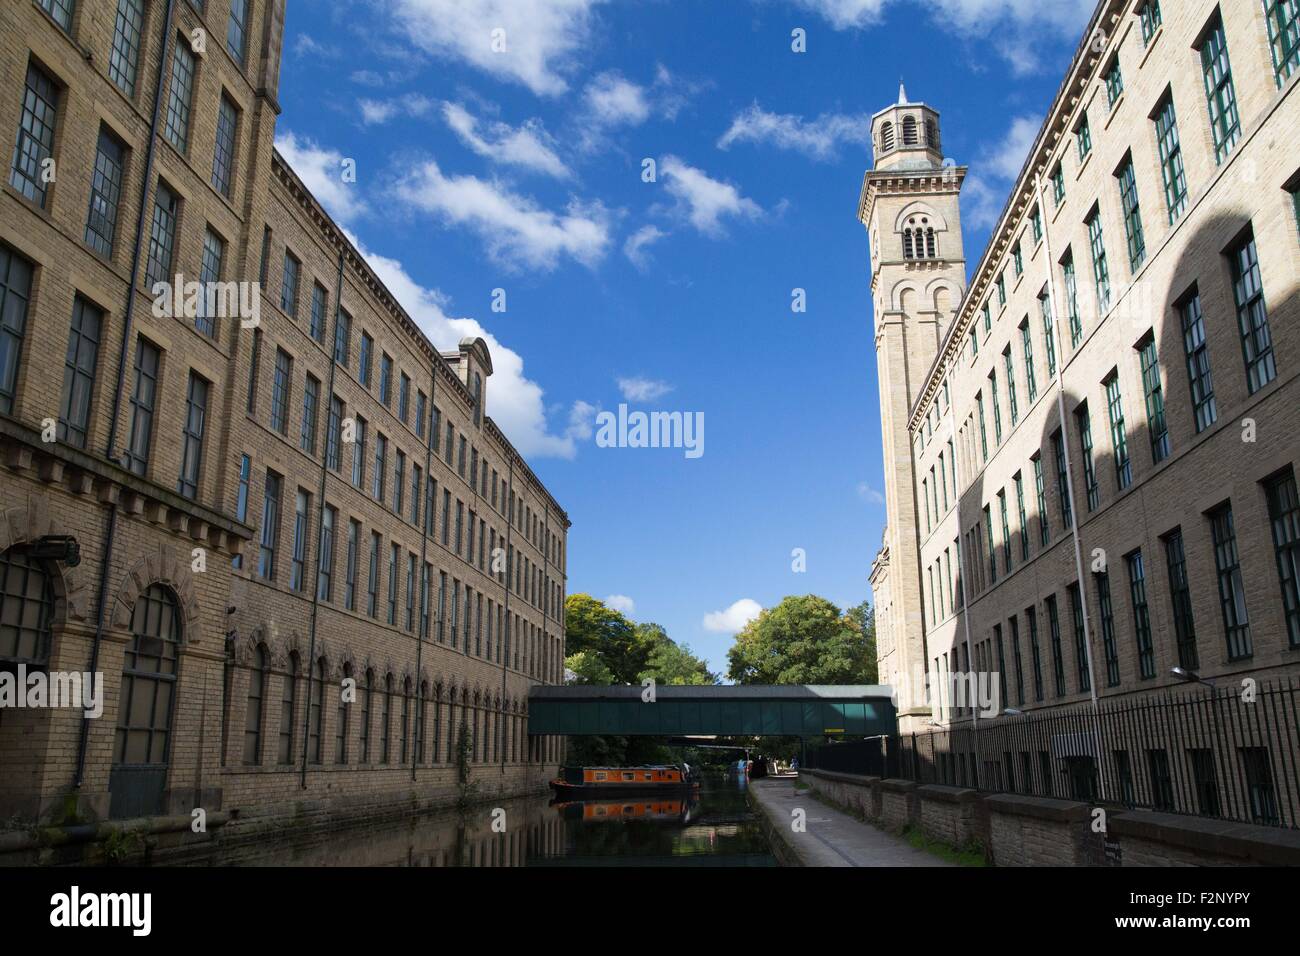 https://c8.alamy.com/comp/F2NYPY/salts-mill-in-saltaire-bradford-west-yorkshire-england-ian-hinchliffe-F2NYPY.jpg